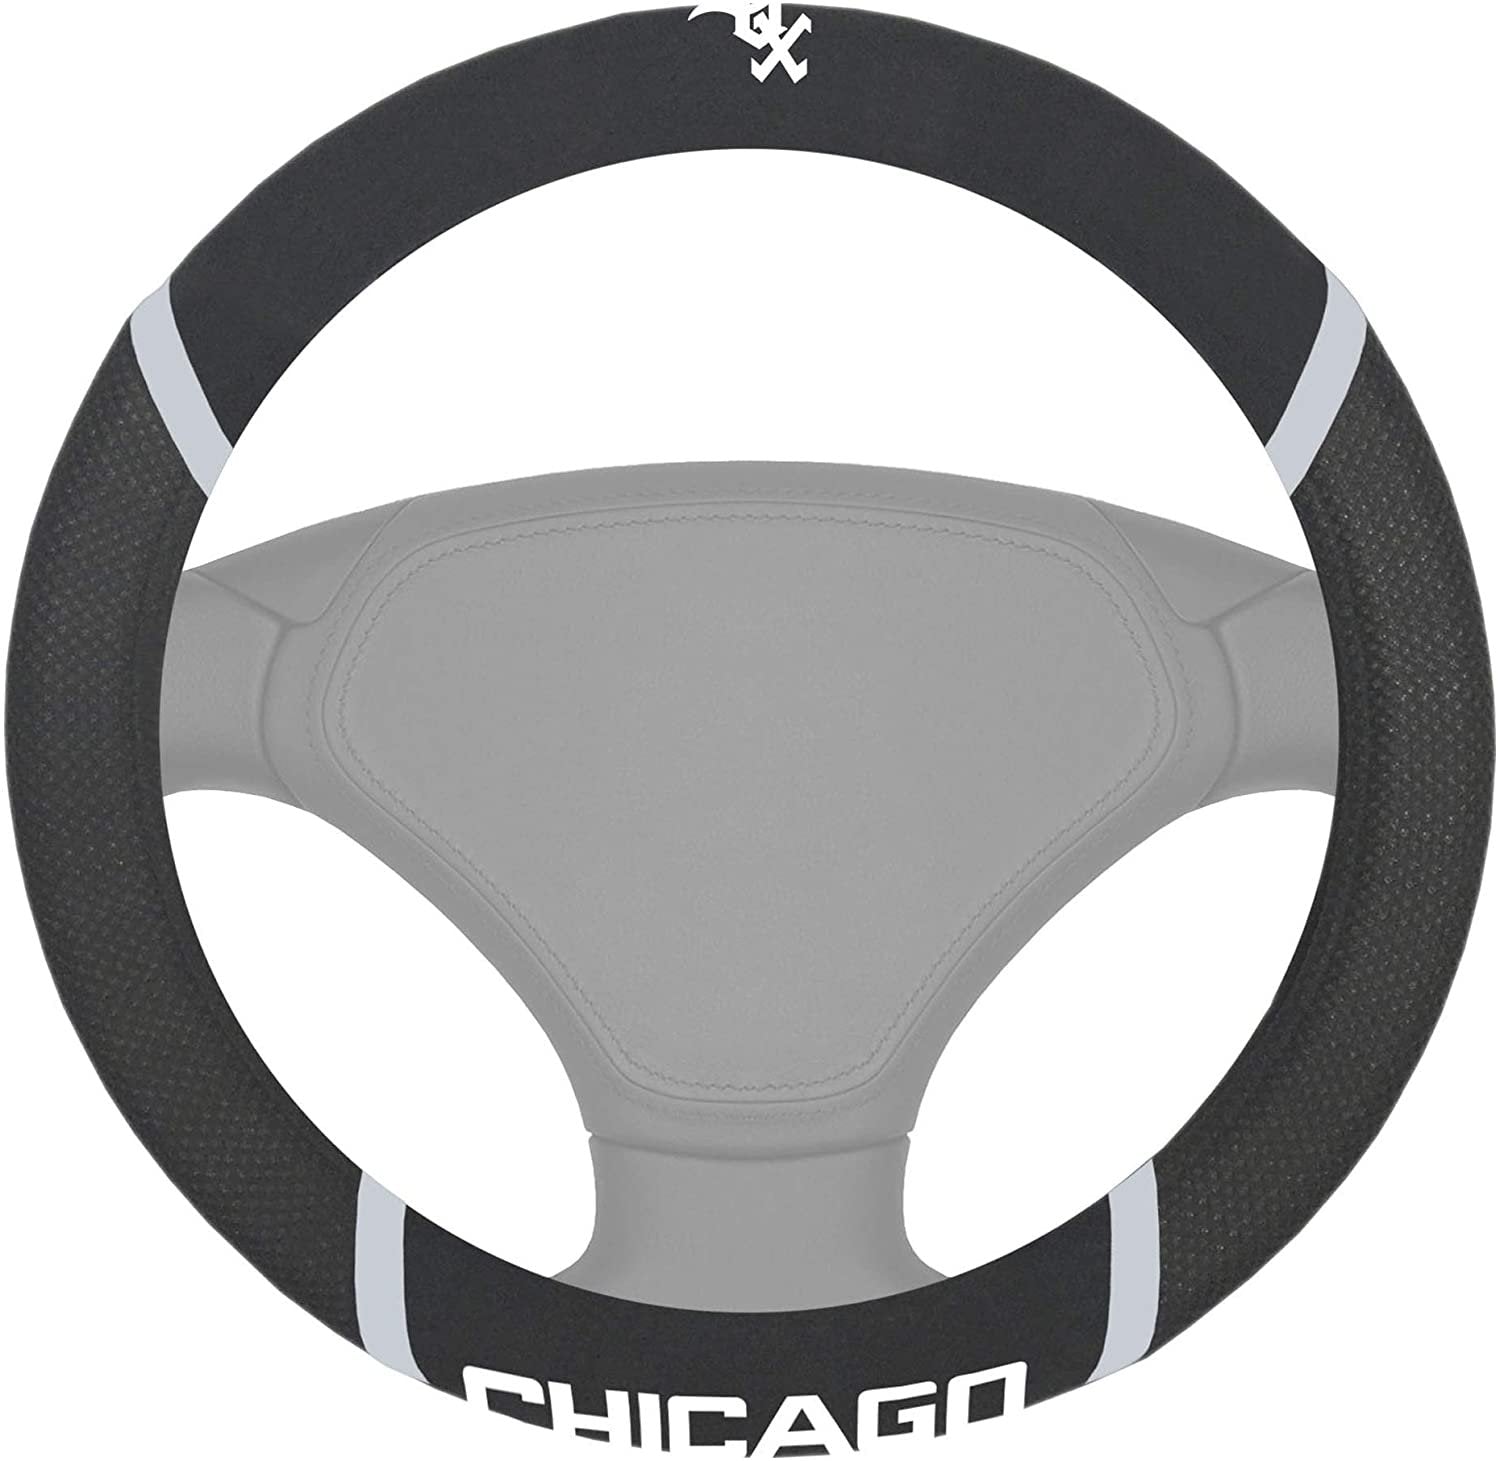 Chicago White Sox Steering Wheel Cover Premium Embroidered Black 15 Inch